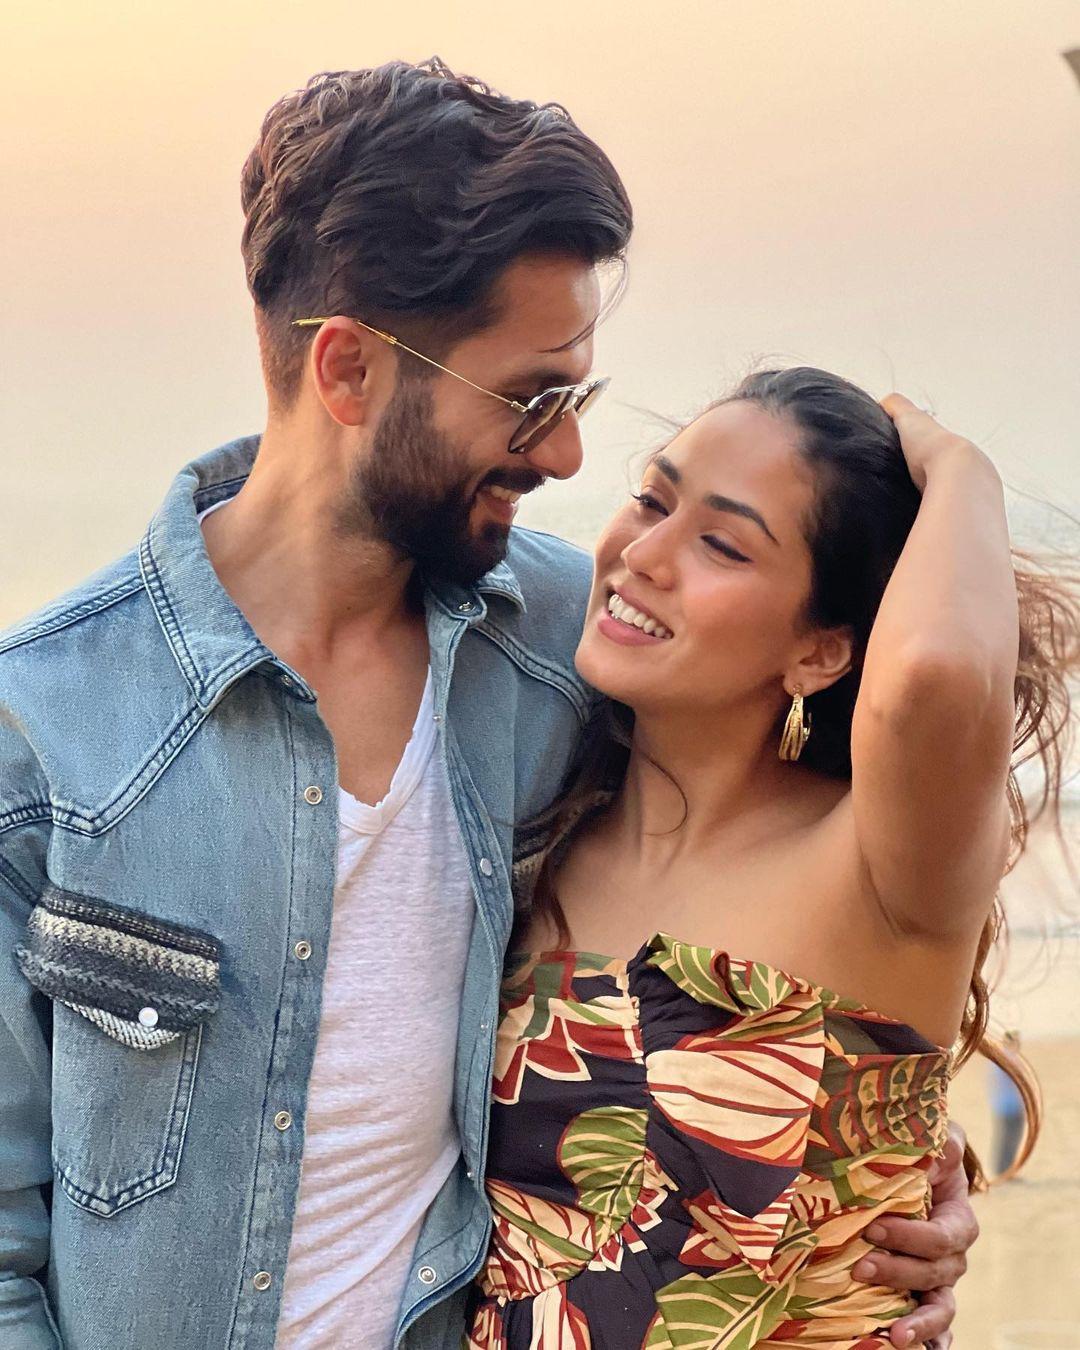 The couple looked adorable in their outfits. Mira wore a sleeveless dress while Shahid kept it casual and complimented her lady love in a white T-shirt and blue shirt